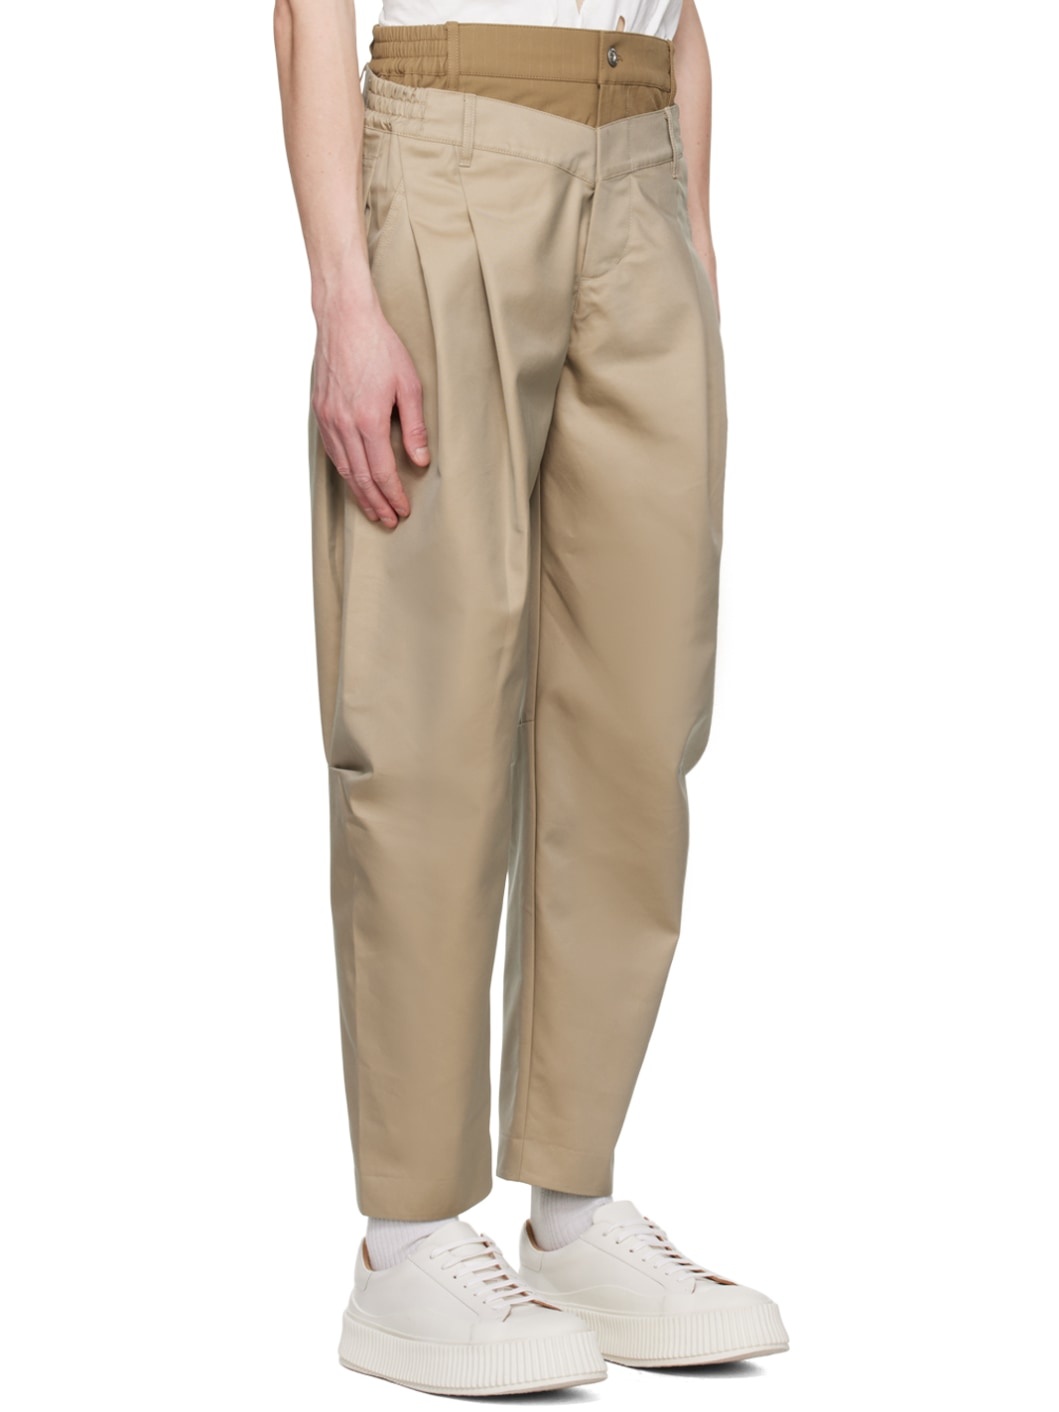 Feng Chen wang color blended trousers | jayceebrands.com